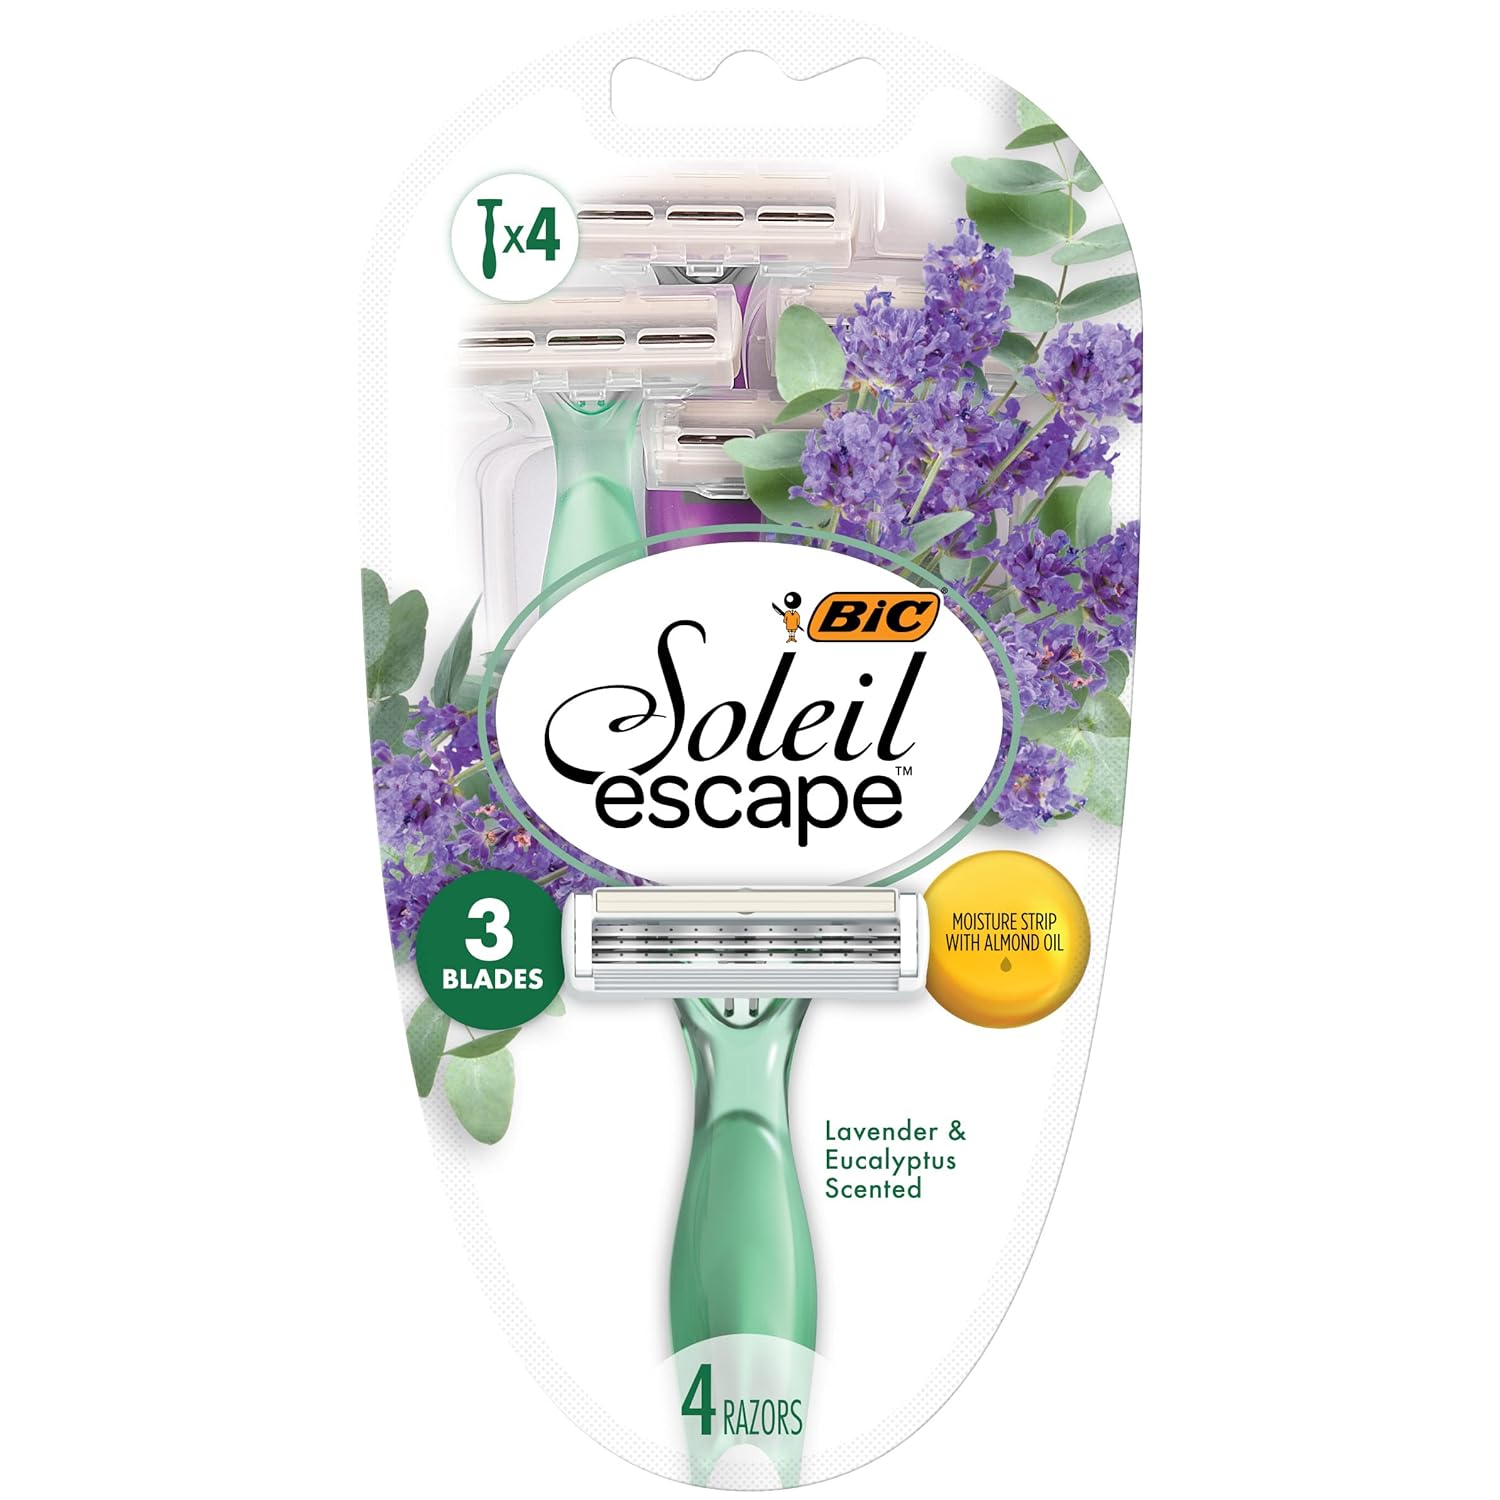 BIC Soleil Escape Women's Disposable Razors, 3 Blade Razor, Moisture Strip With 100% Natural Almond Oil, Lavender and Eucalyptus Scented Handles, 4 Pack Disposable Razors For Women Green